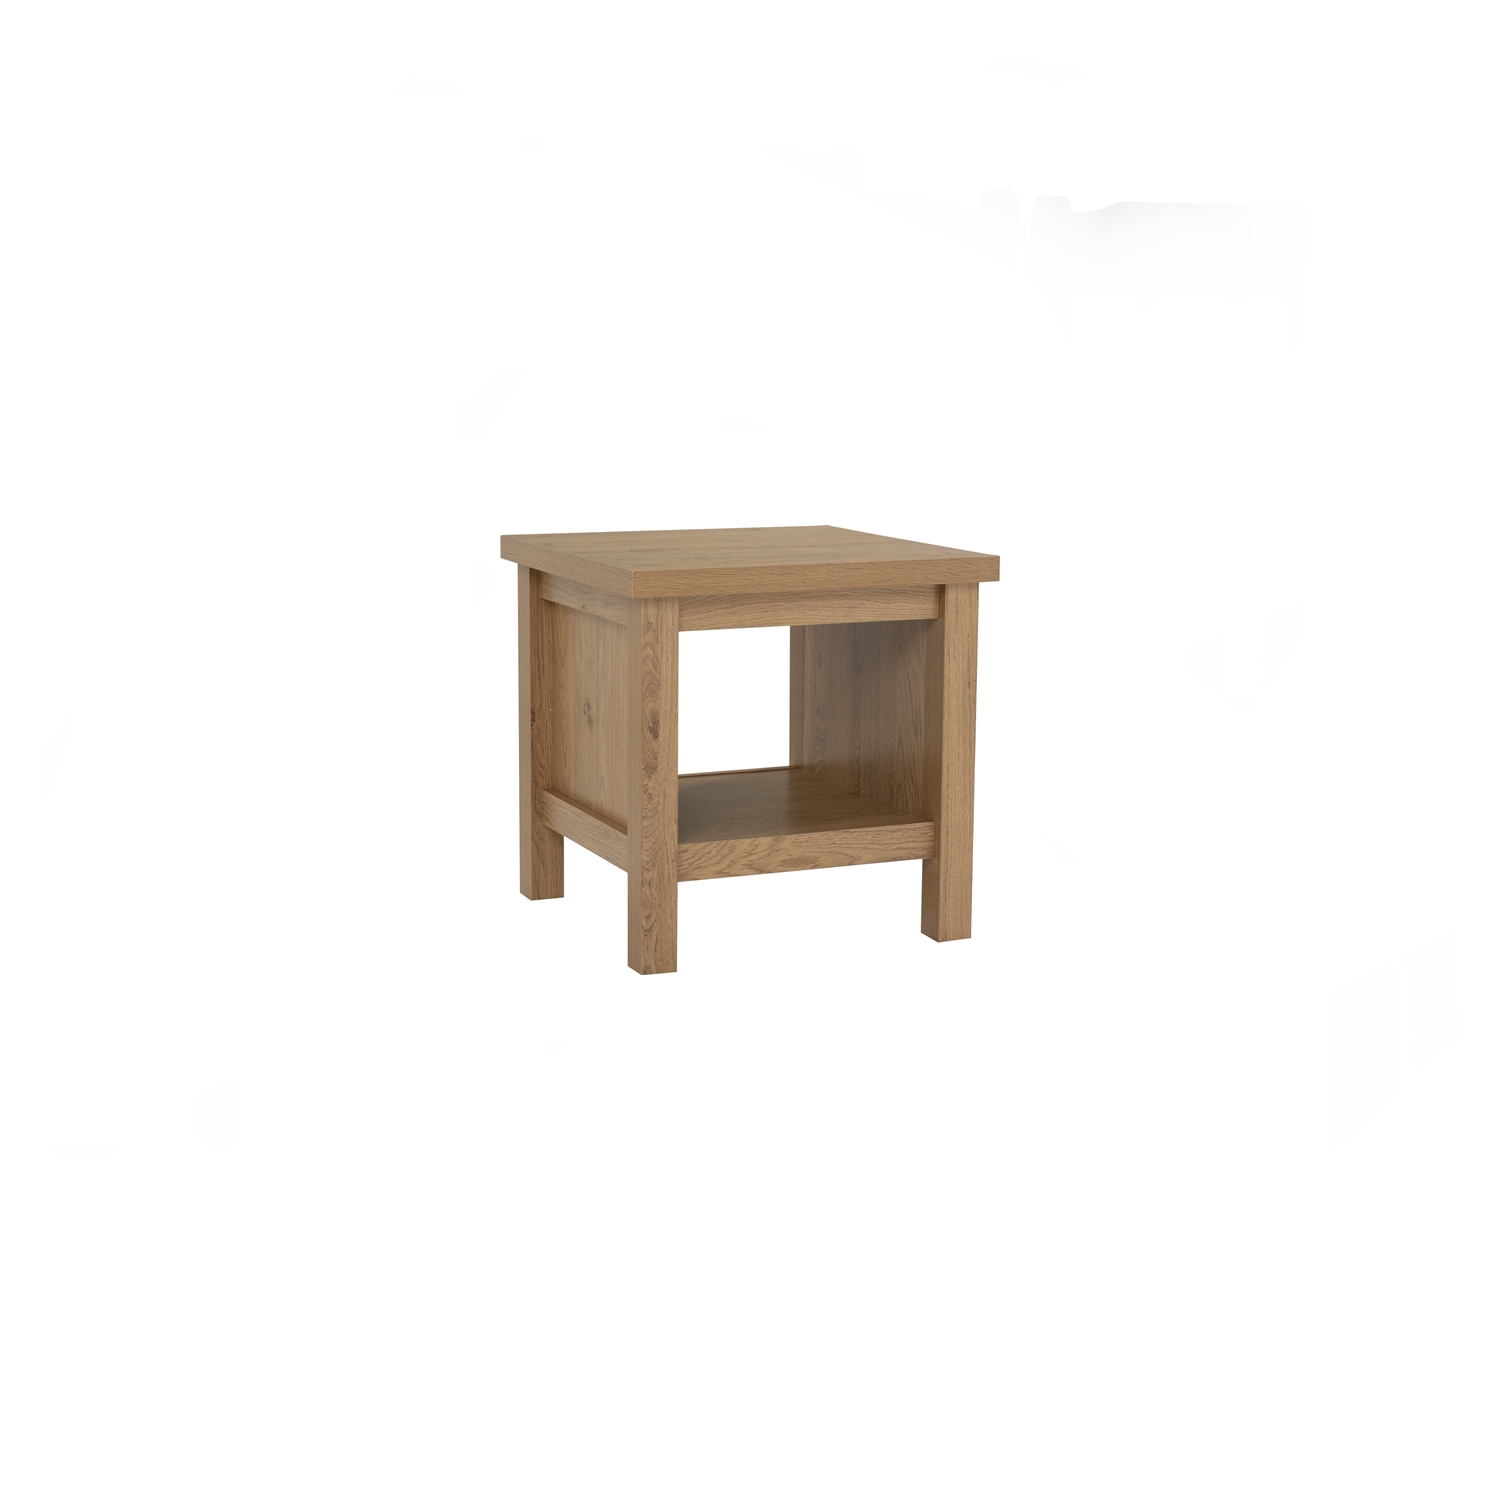 SIDE TABLE16